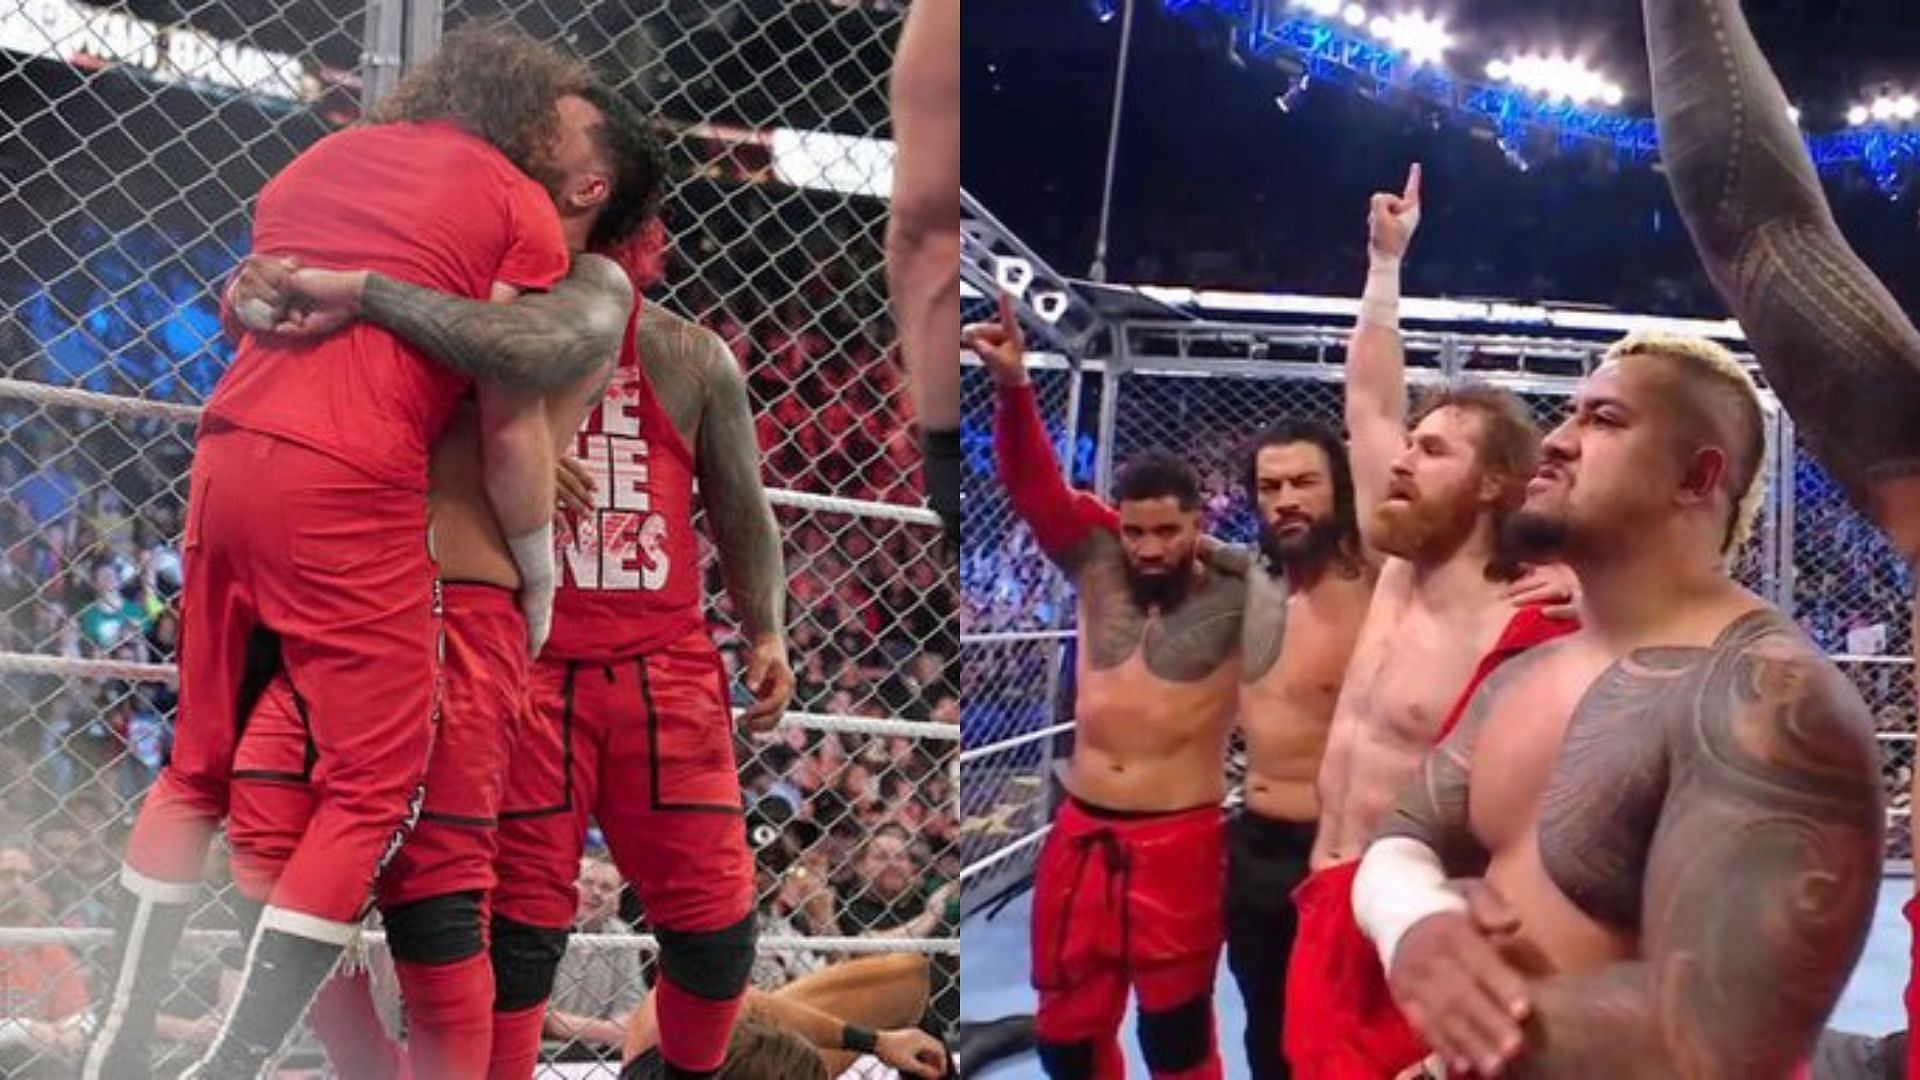 Sami Zayn and Jey Uso shared another heartfelt moment at a house show